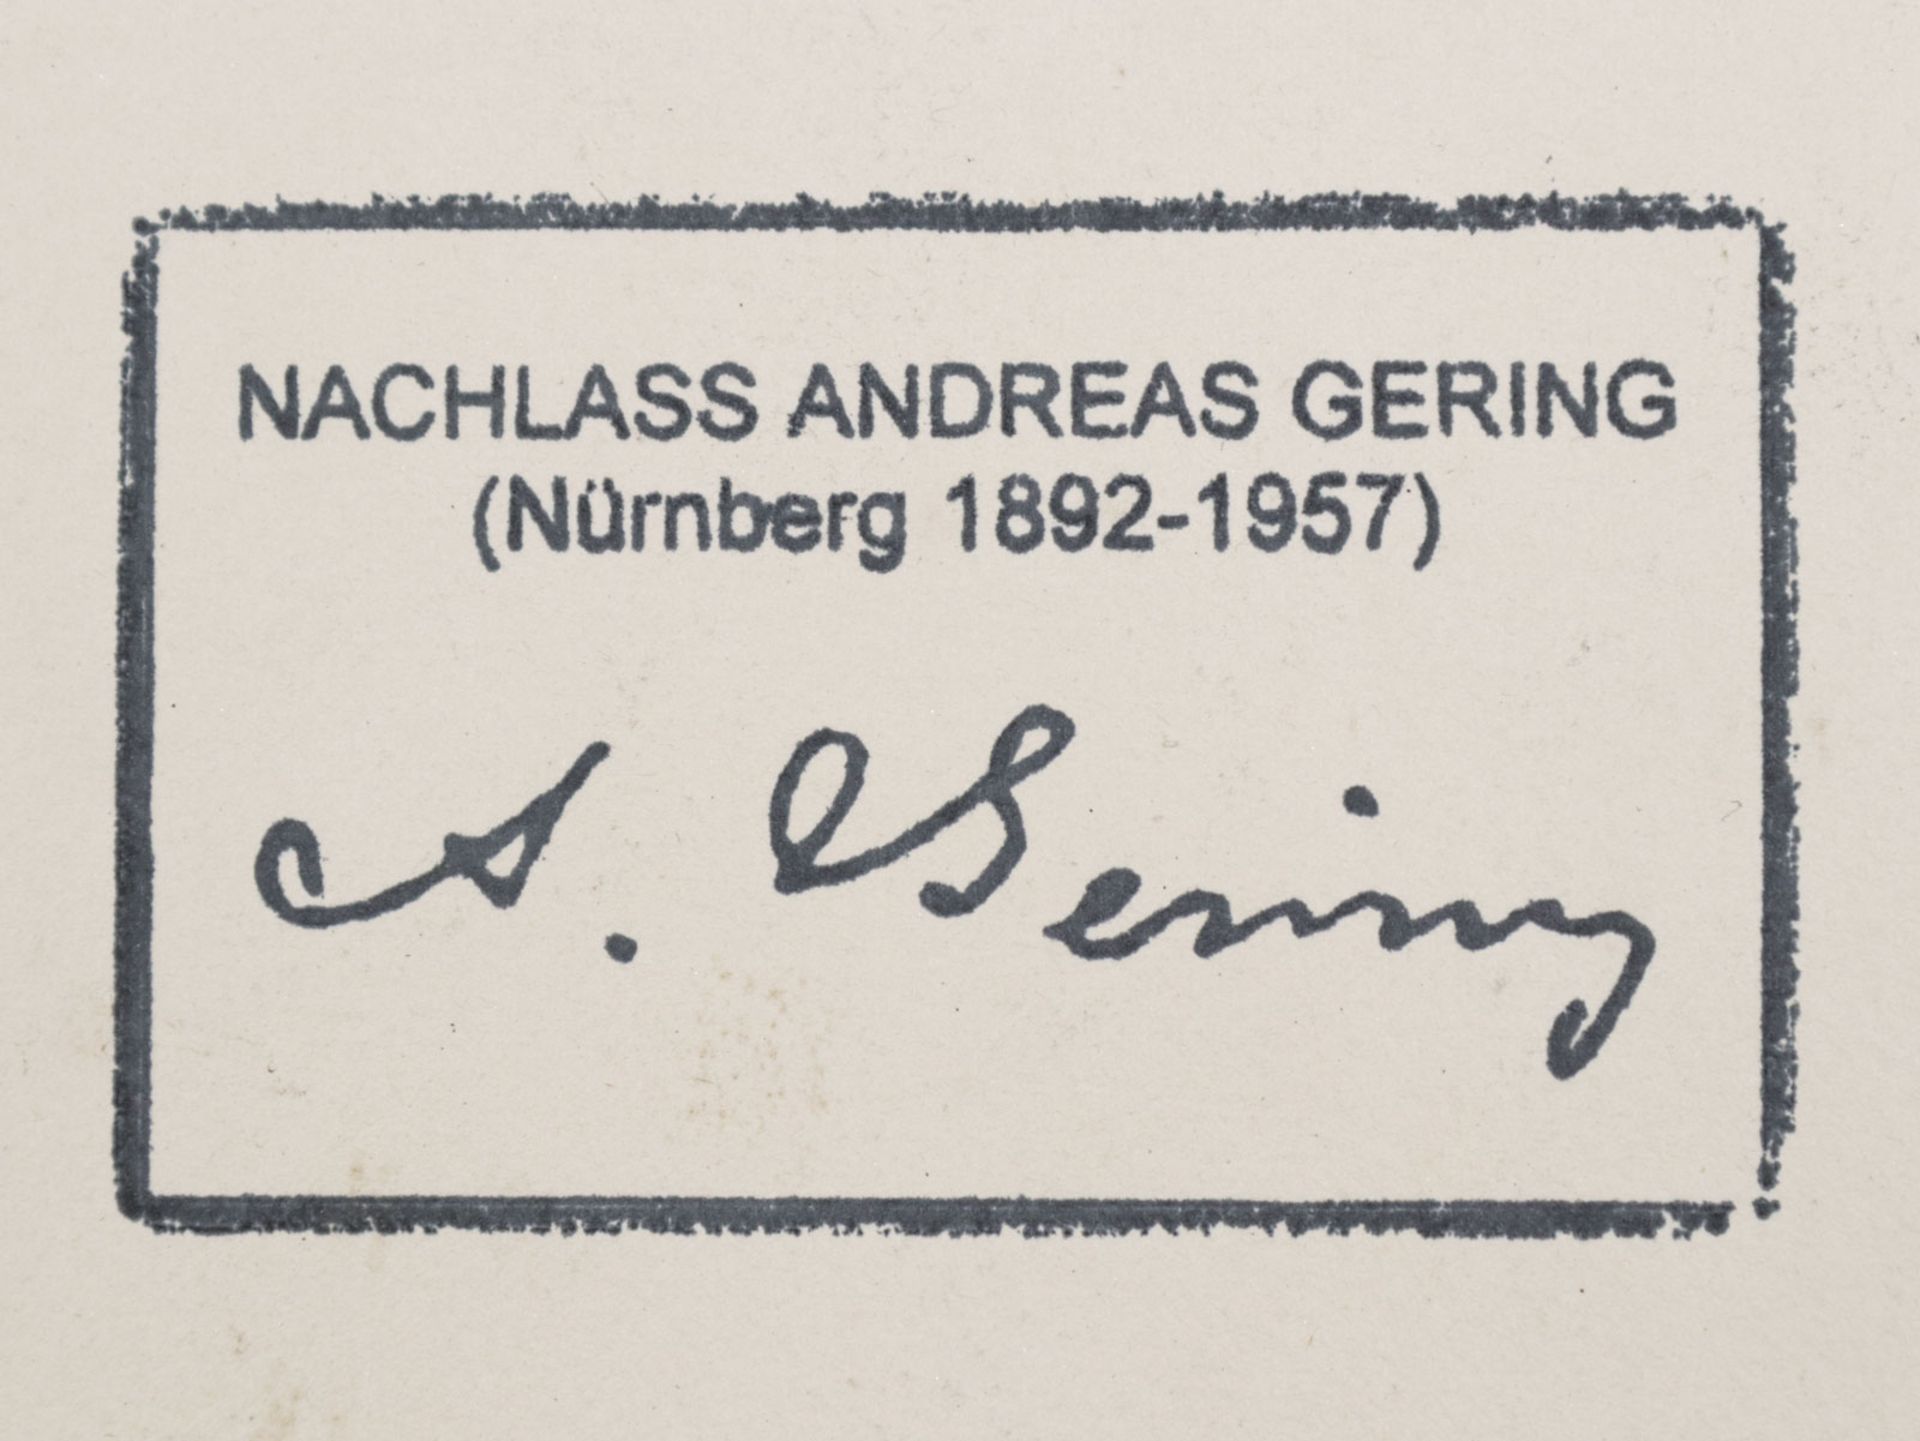 Gering, Andreas - Image 6 of 6